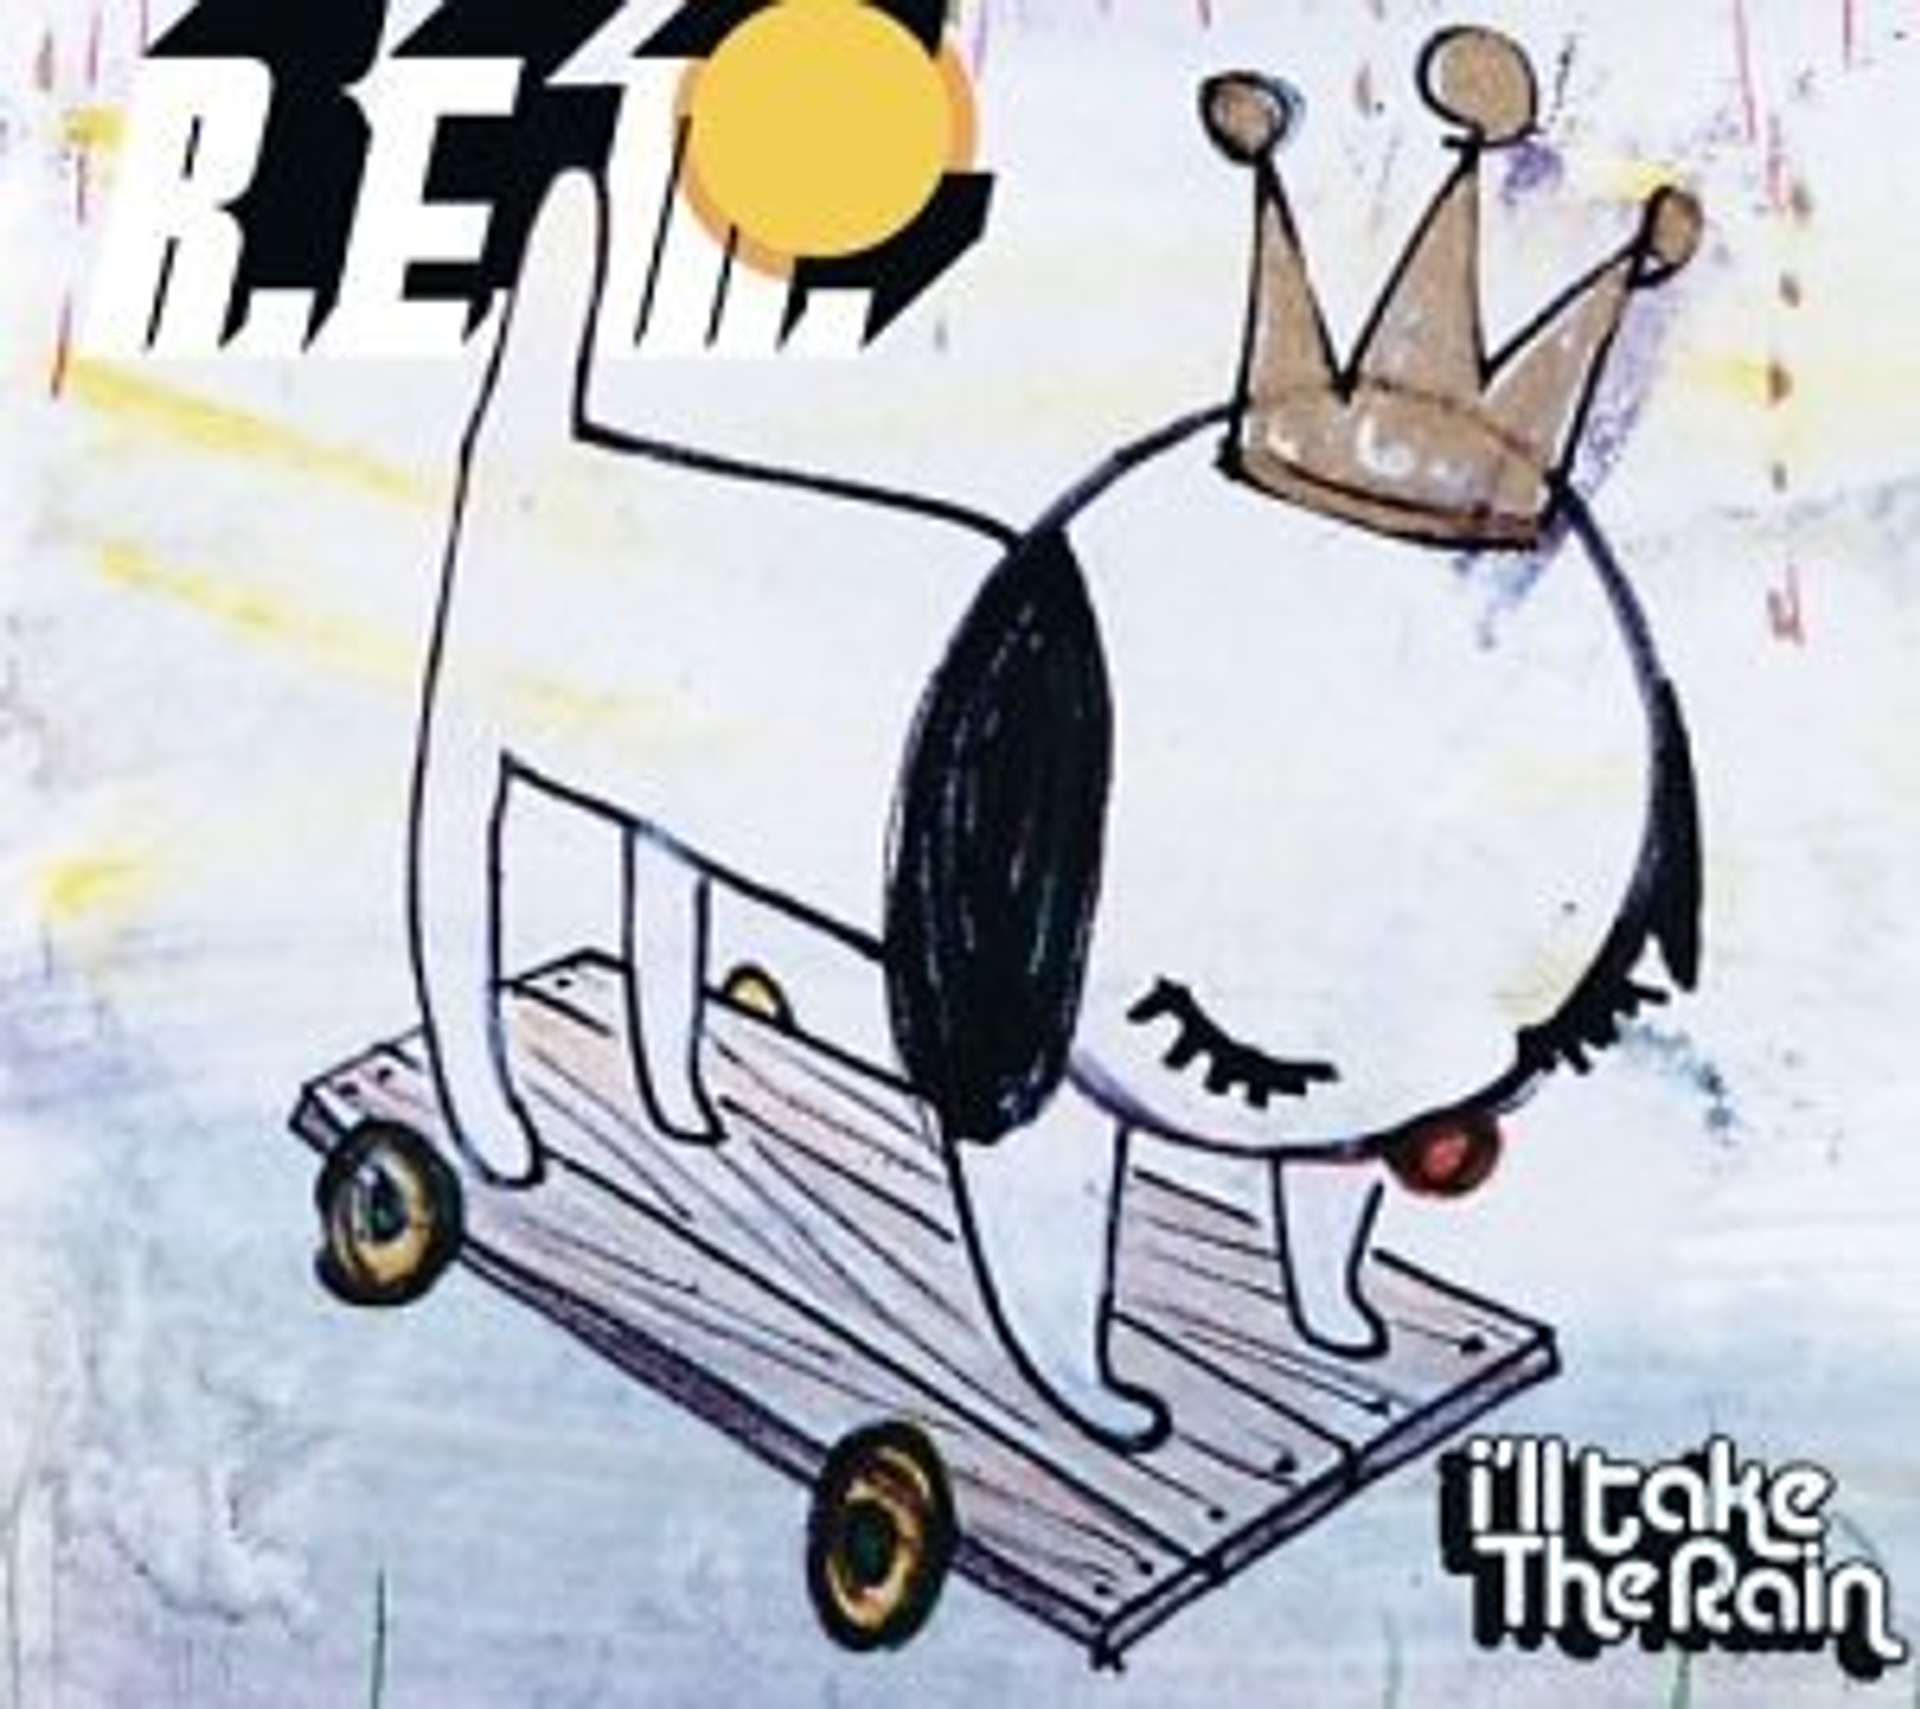 An image of the album cover for I’ll Take The Rain, painted by artist Yoshimoto Nara. It depicts a crown-bearing dog atop a wooden cart.